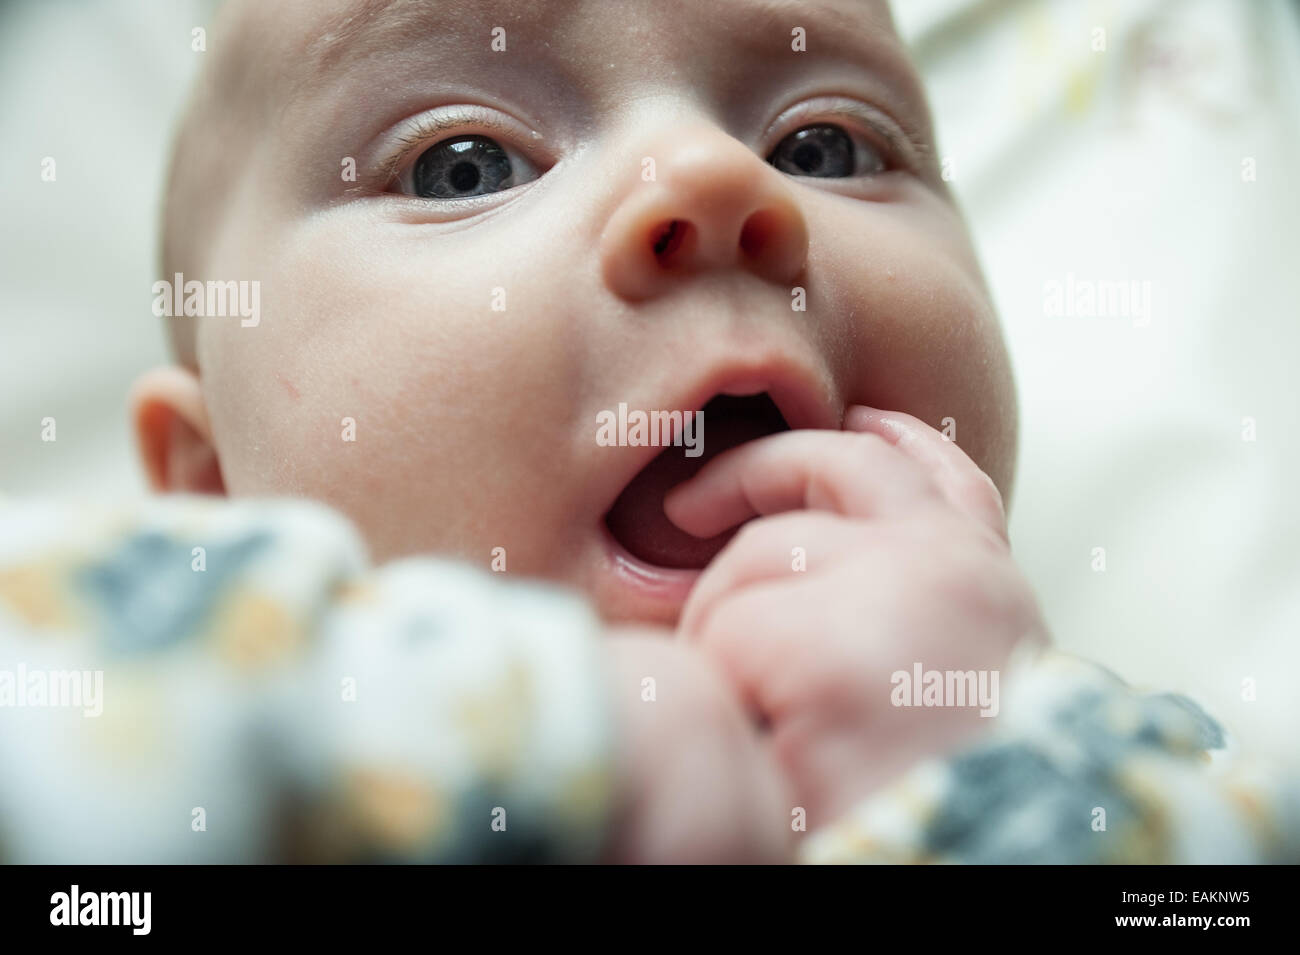 A baby girl (ca. 3 months old) sticks her fingers into her mouth. Stock Photo